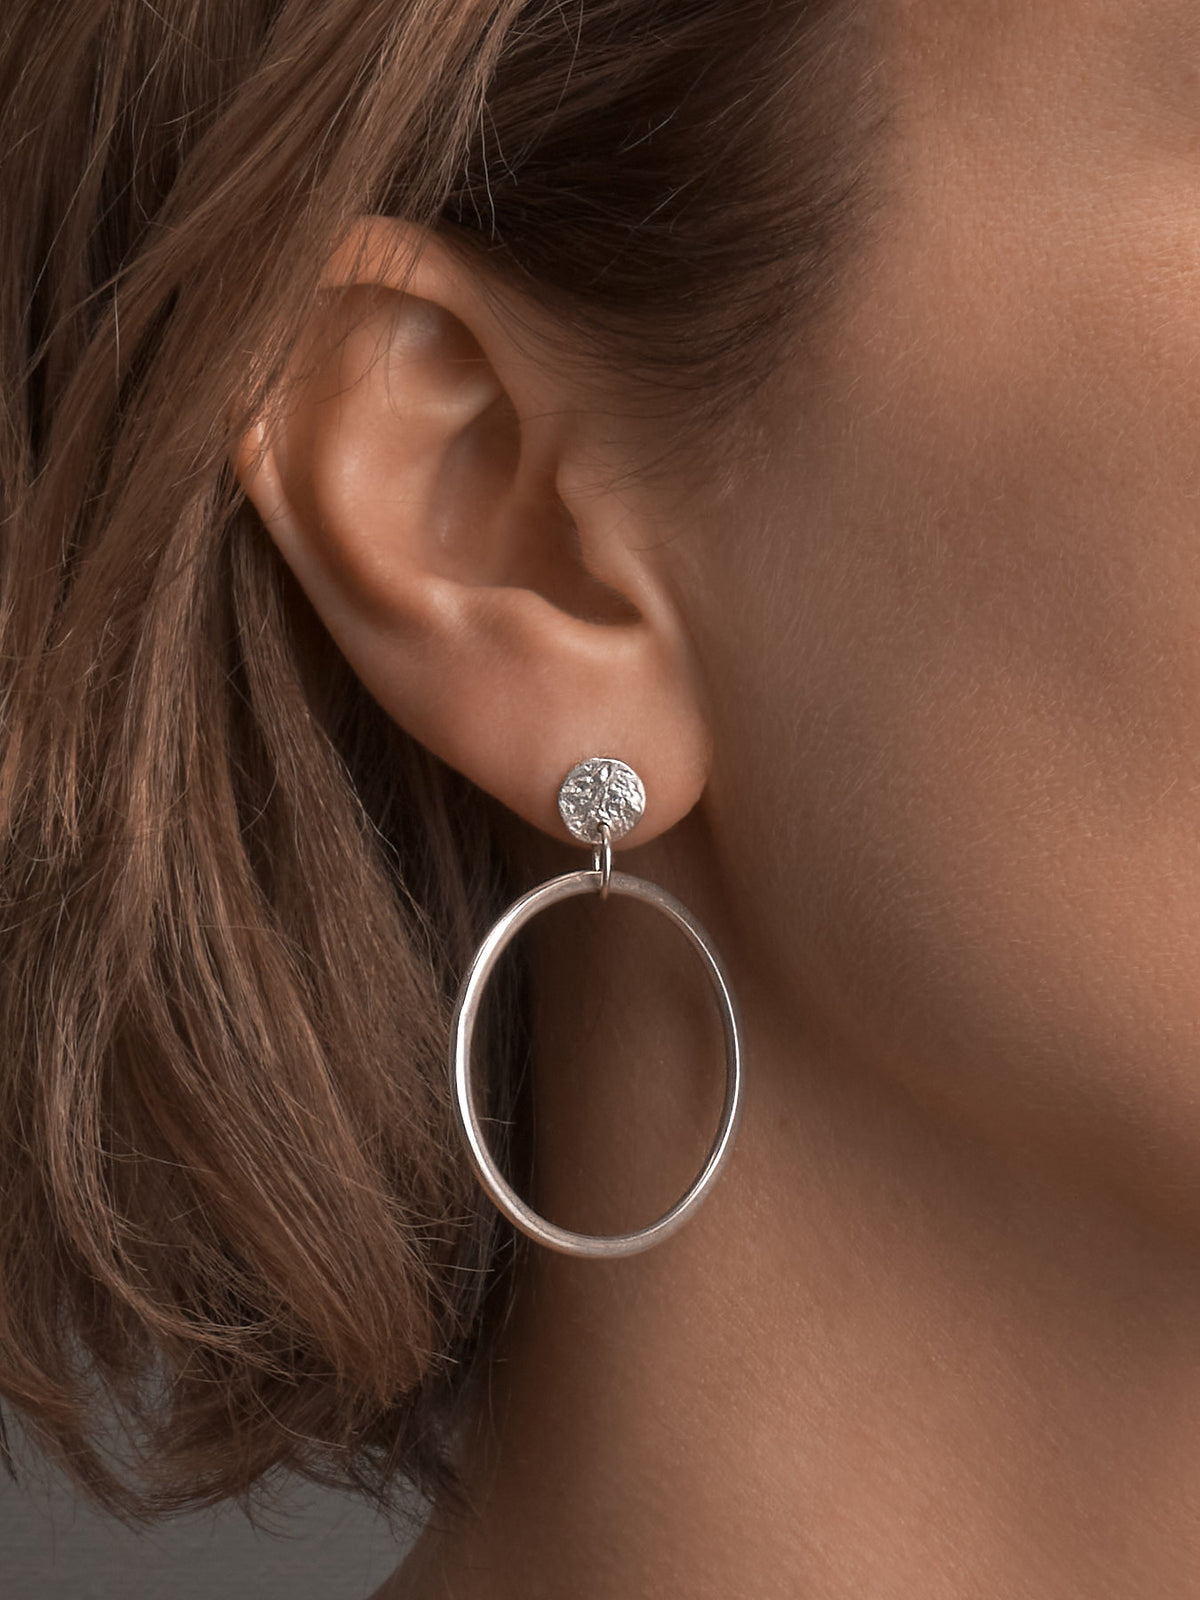 A woman wearing a pair of Ripple Loop Earrings from Amy Iddles Jeweller.